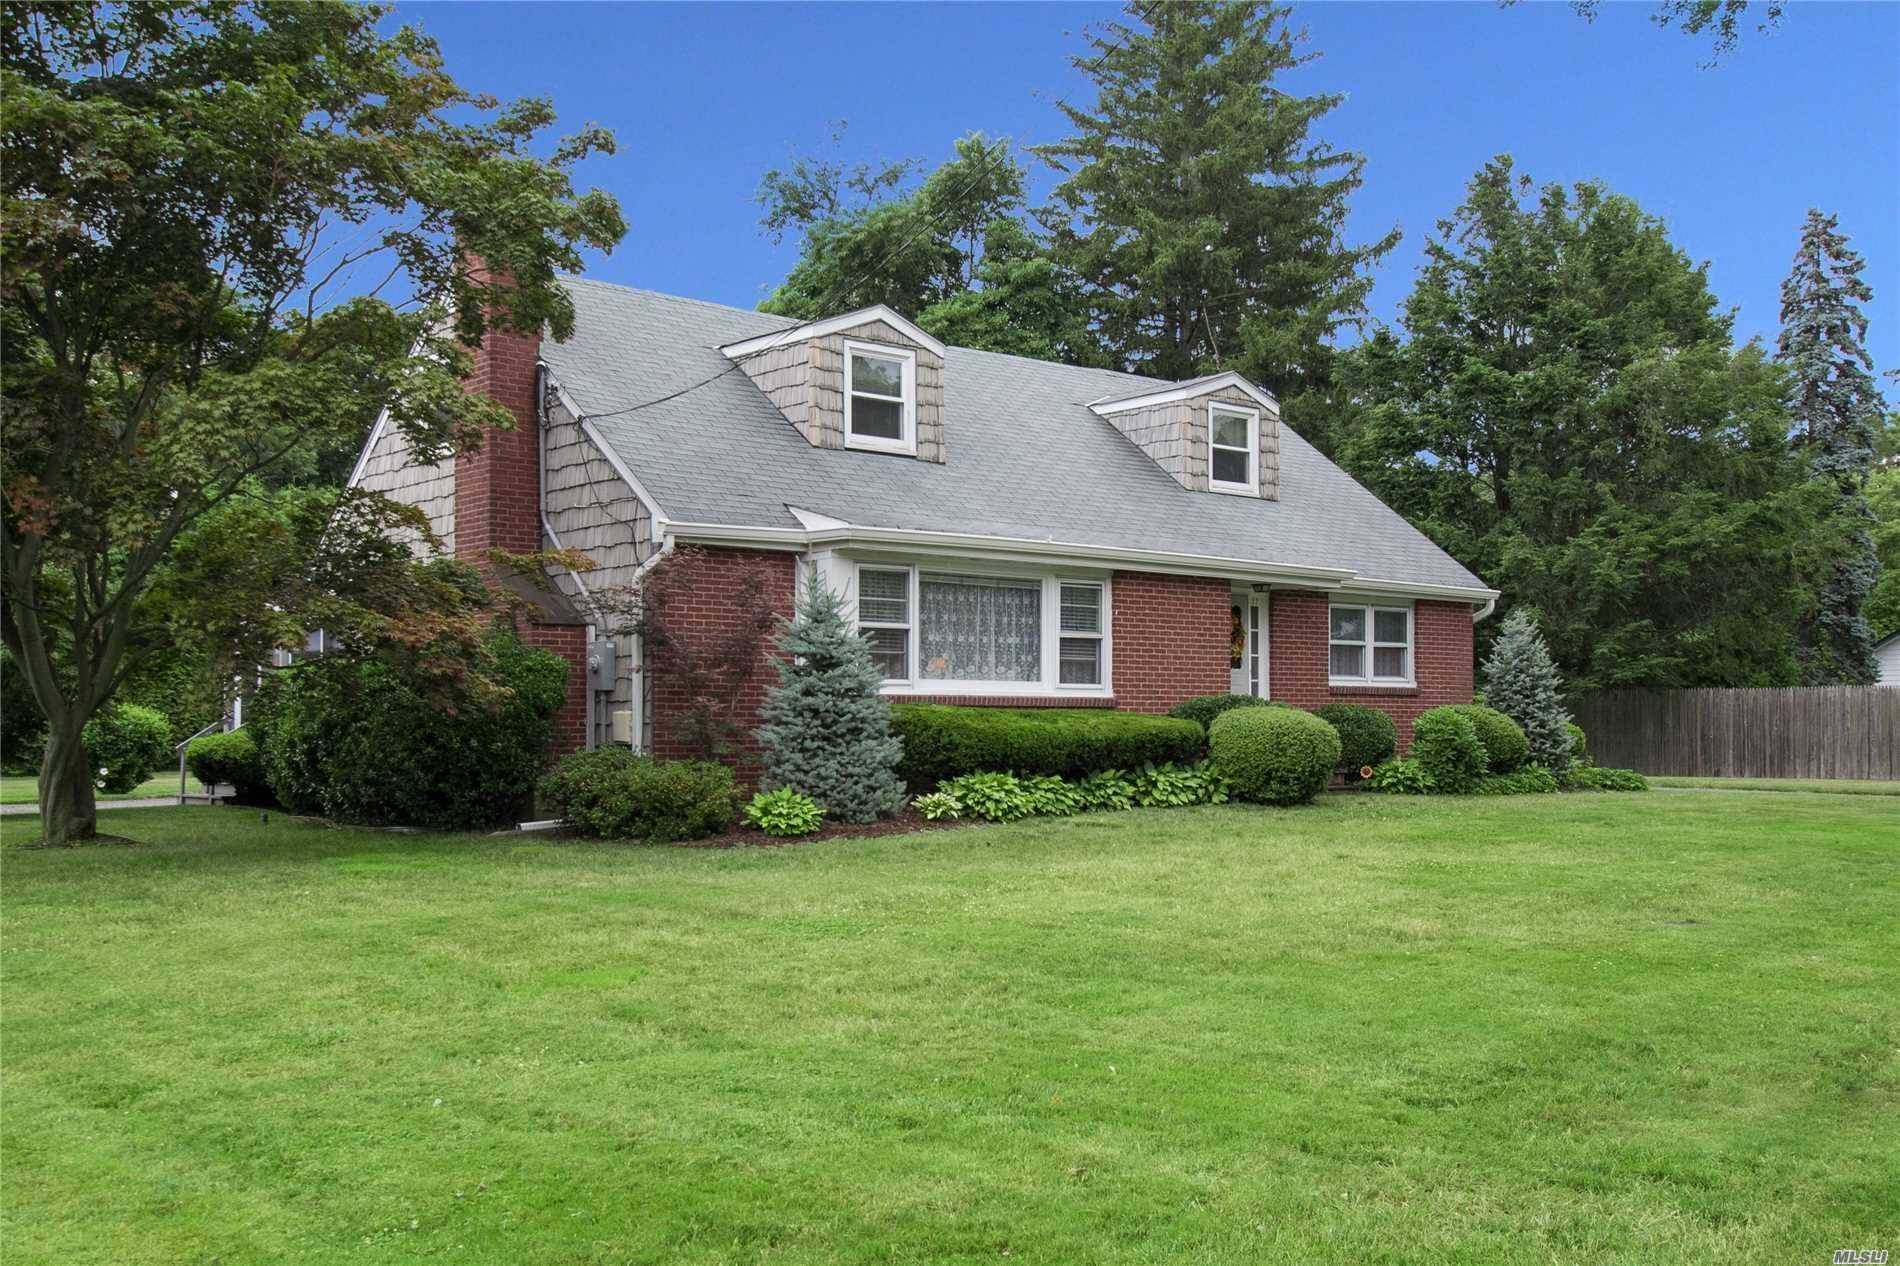 Pristine Cape On A Lovely Tree Lined Street, In Desirable North Greenlawn.